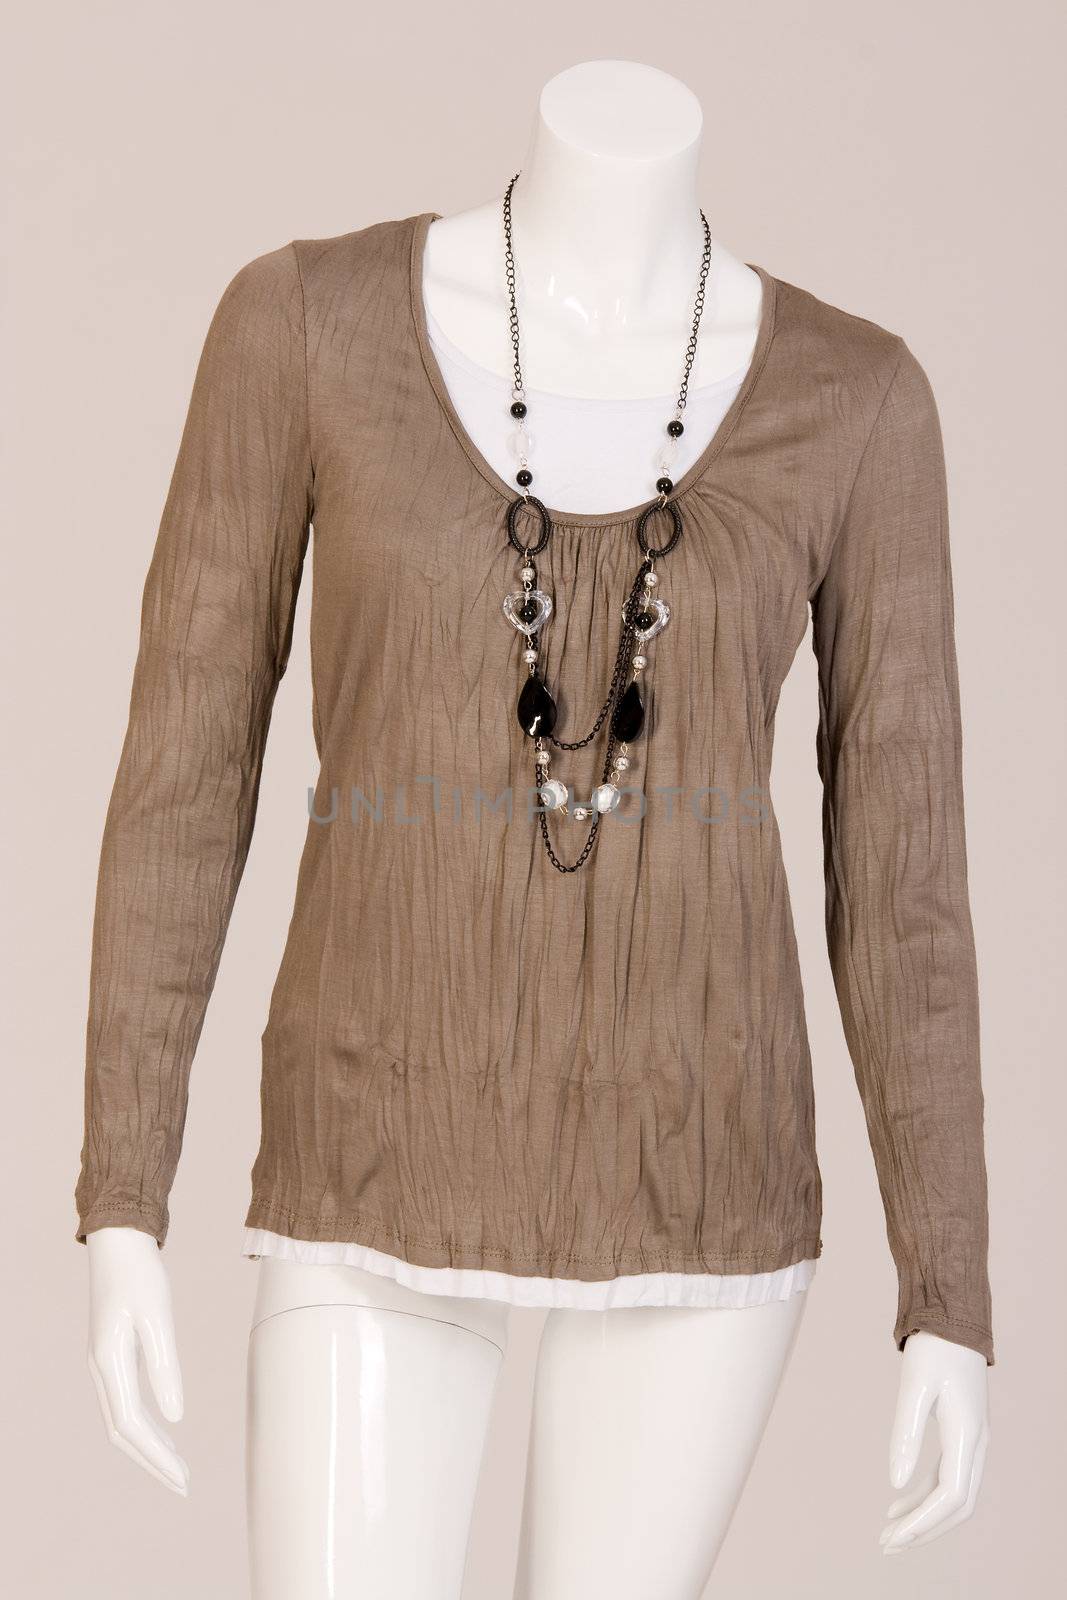 Mannequin dressed in a beige shirt and fashionable chain